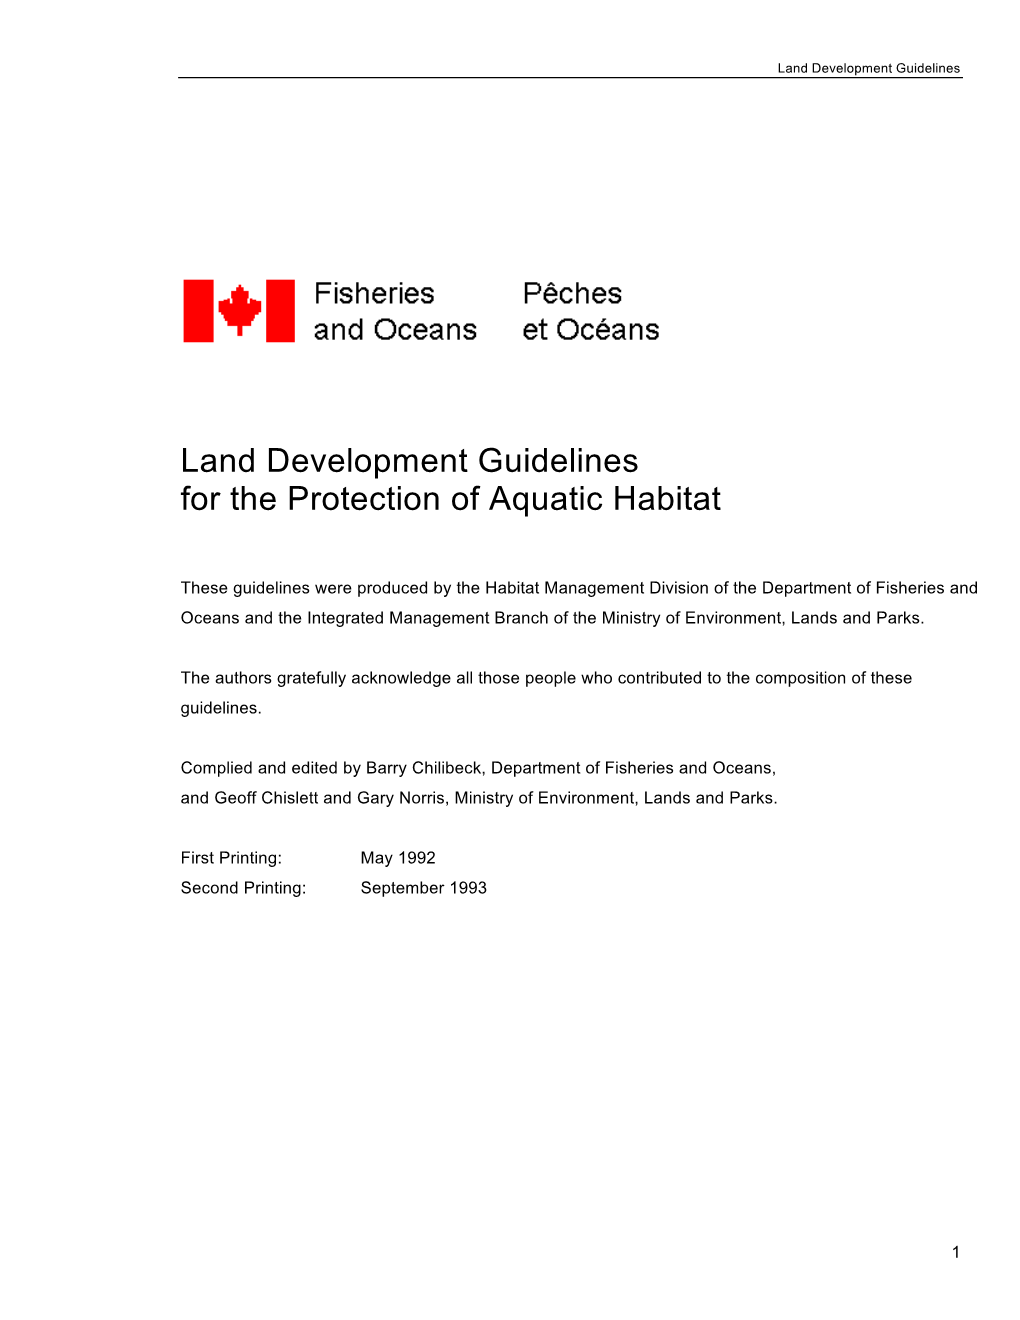 Land Development Guidelines for the Protection of Aquatic Habitat